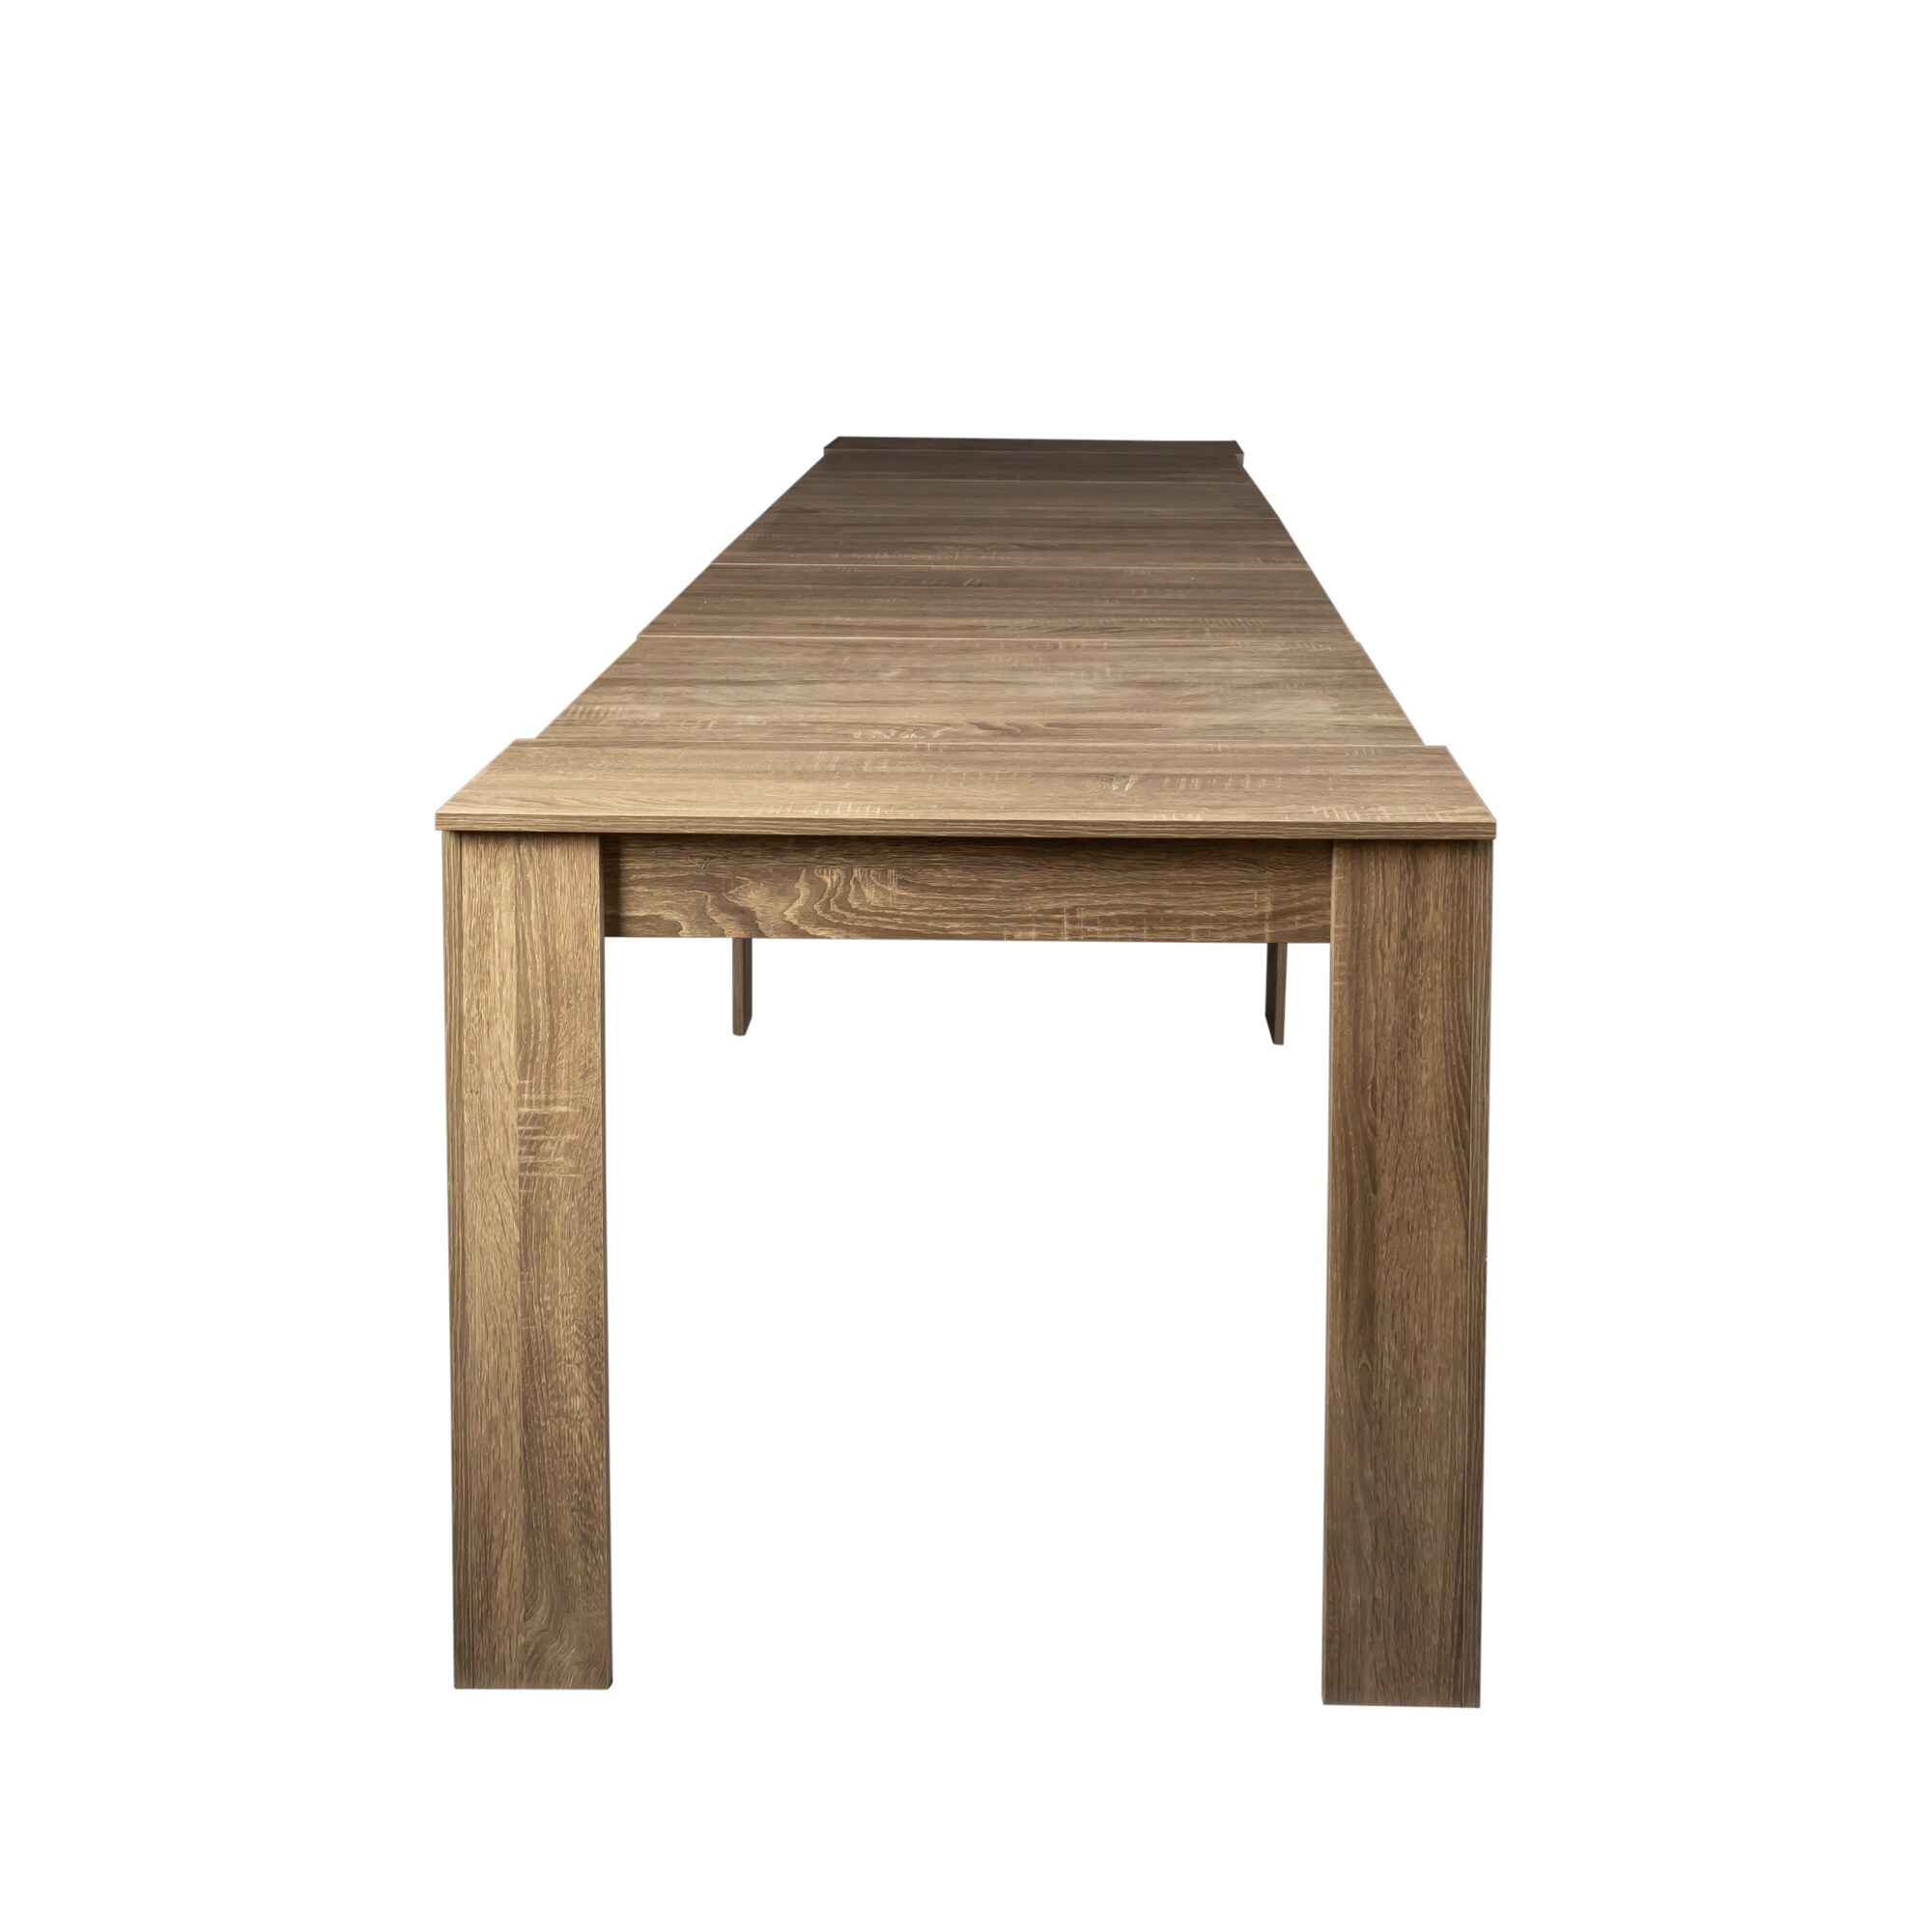 Buy wholesale Skraut Home, Extendable Console Table, Folding dining table, 260, For 12 people, Solid wood legs, Modern Style